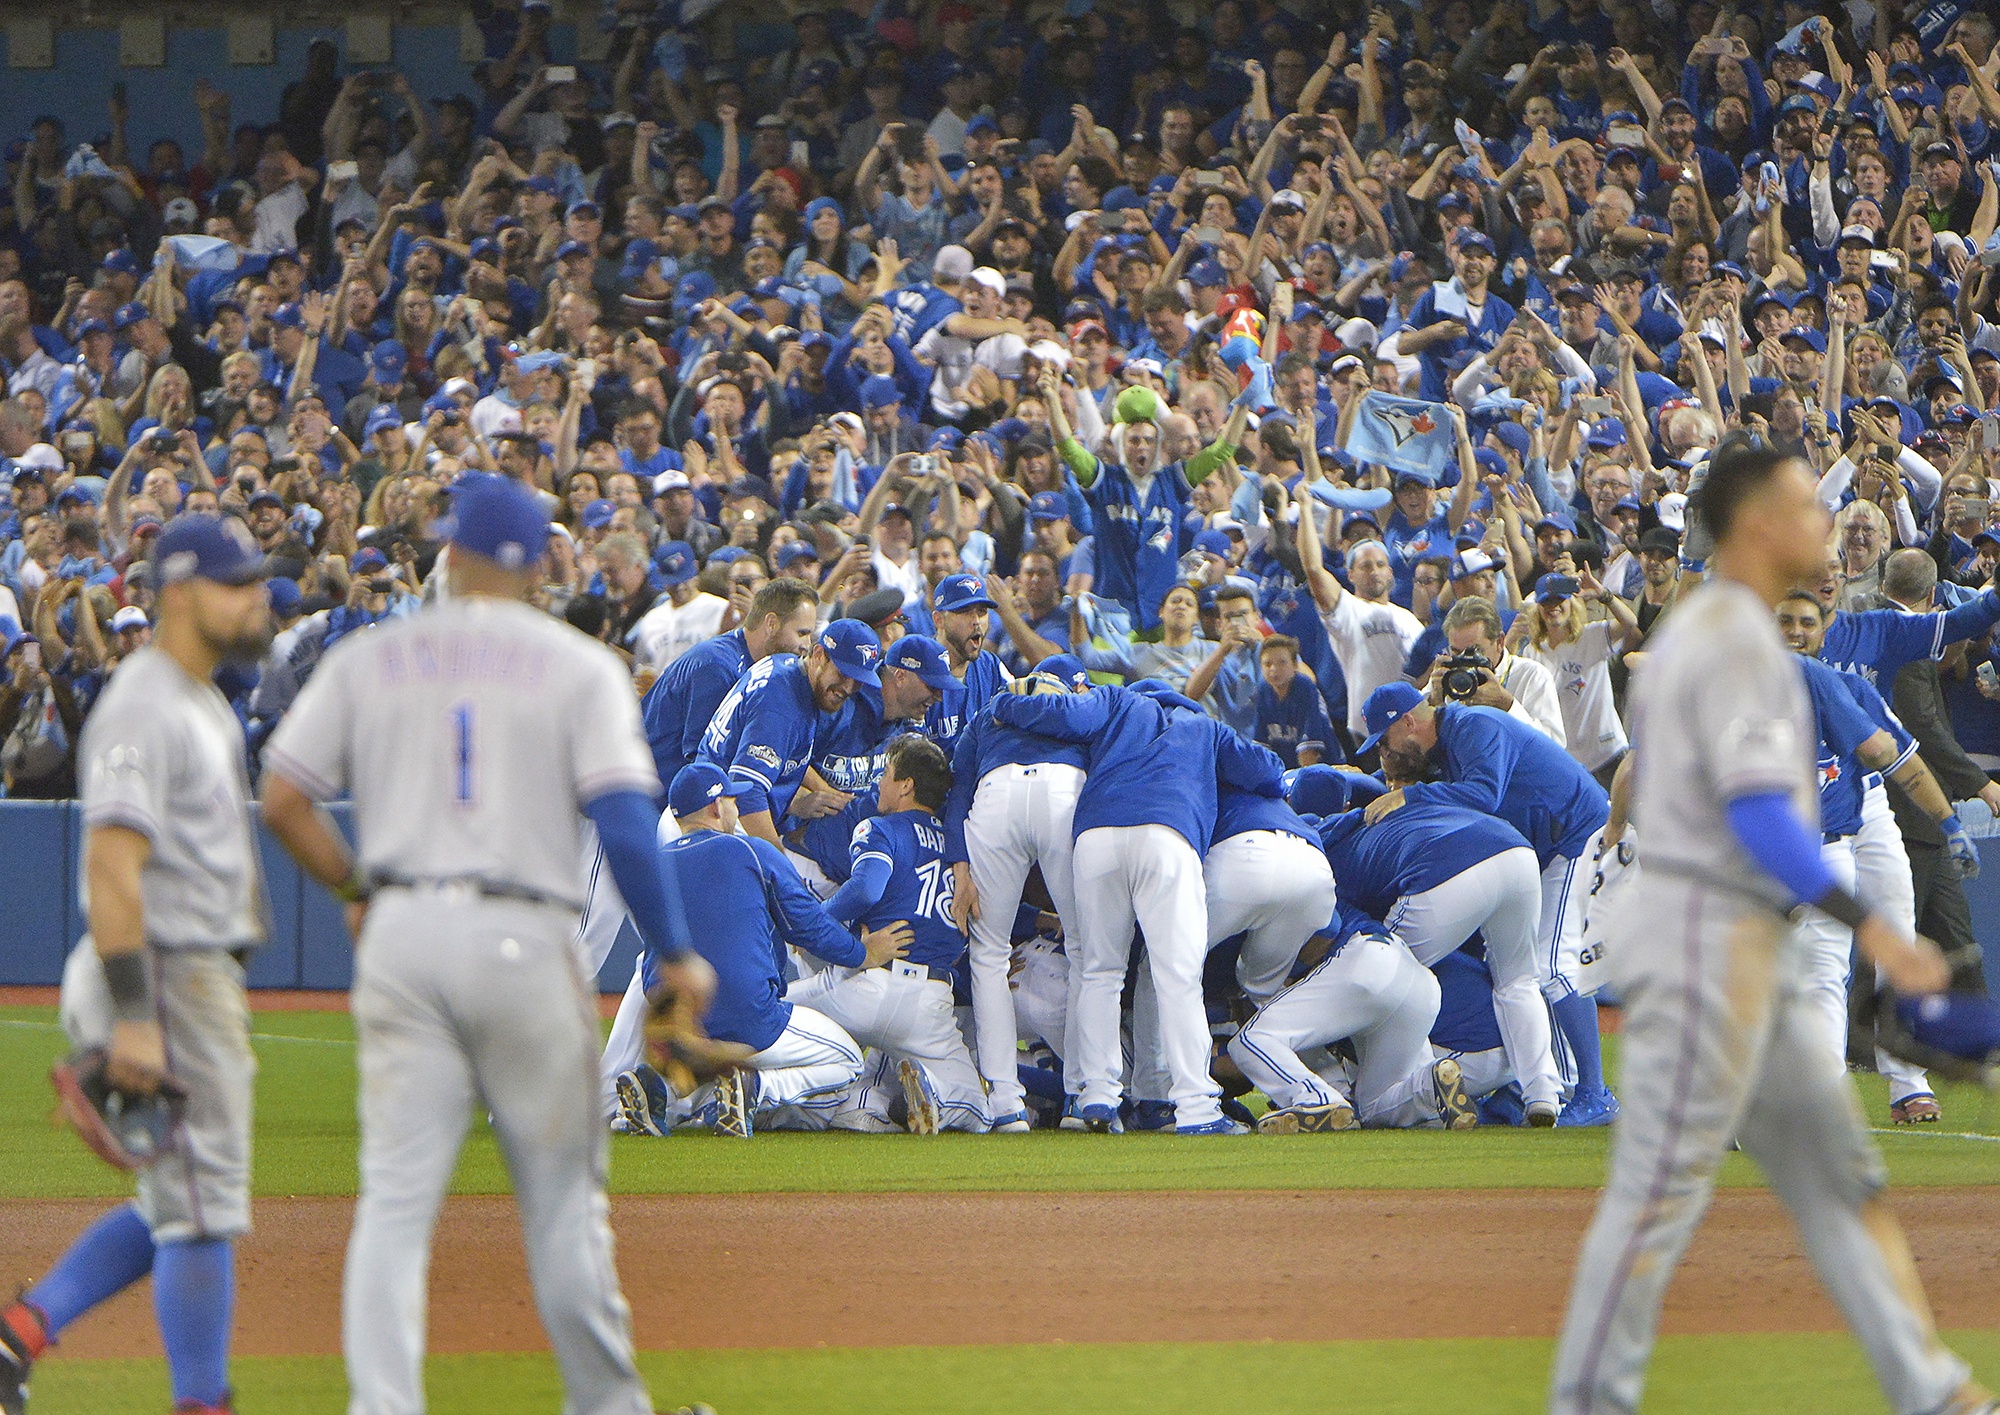 Rangers swept out of ALDS in walk-off loss to Blue Jays